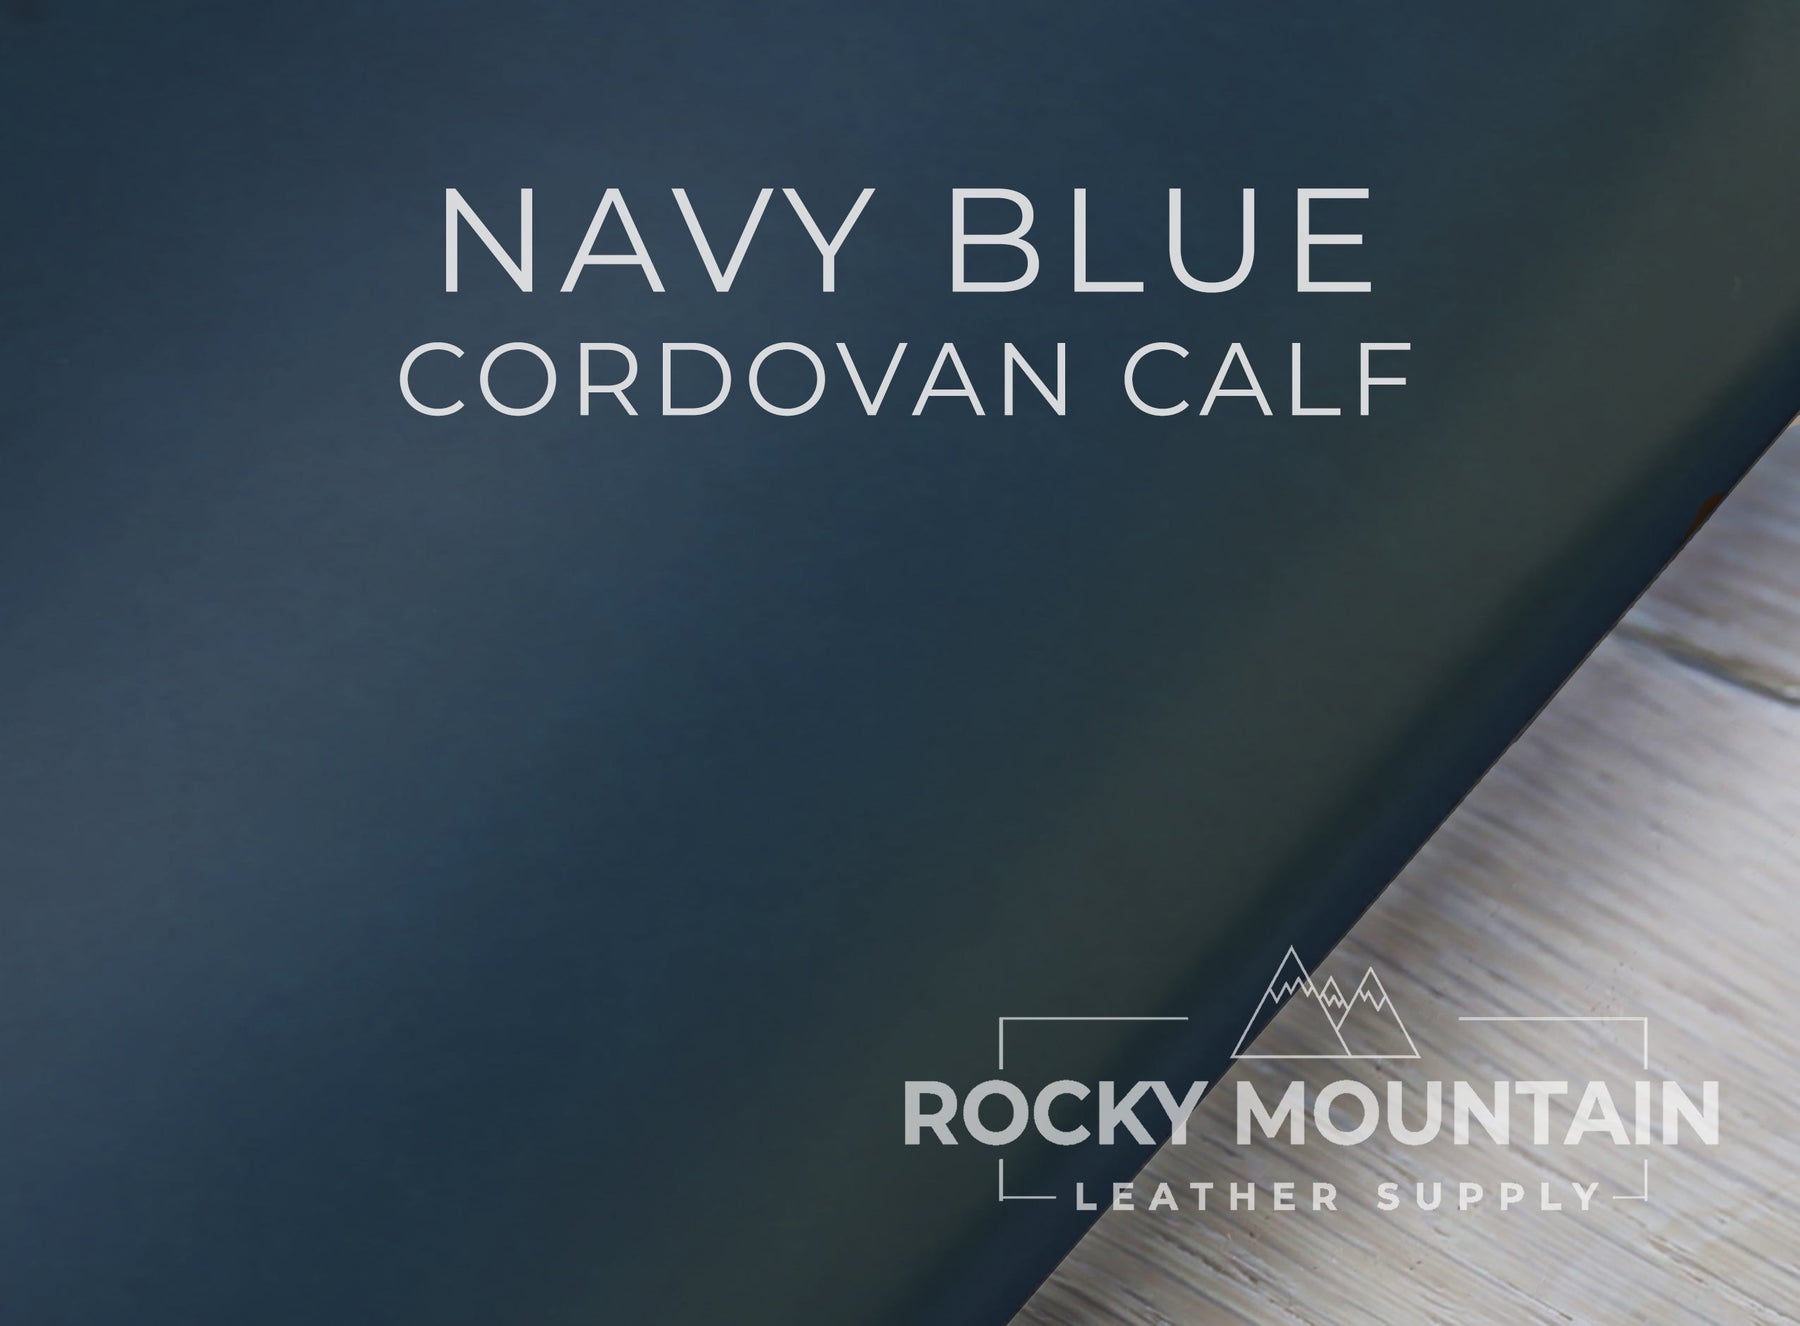 Cordovan Calf 🇪🇺 - Luxury Calfskin Leather "Finished like Shell Cordovan" (HIDES)